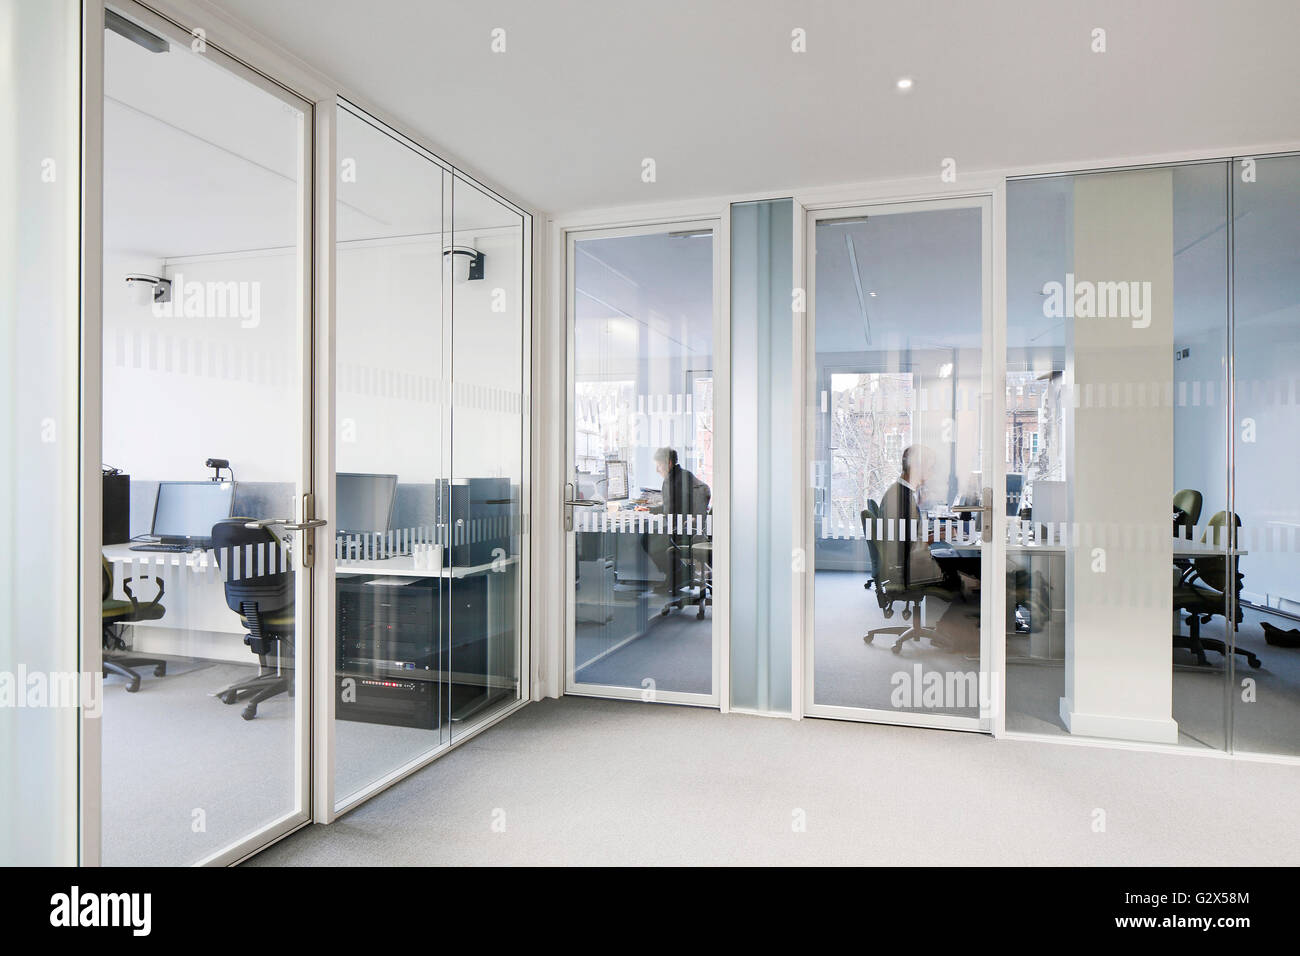 Small business incubation offices. Cavendish House, Norwich, United Kingdom. Architect: Hudson Architects, 2015. Stock Photo